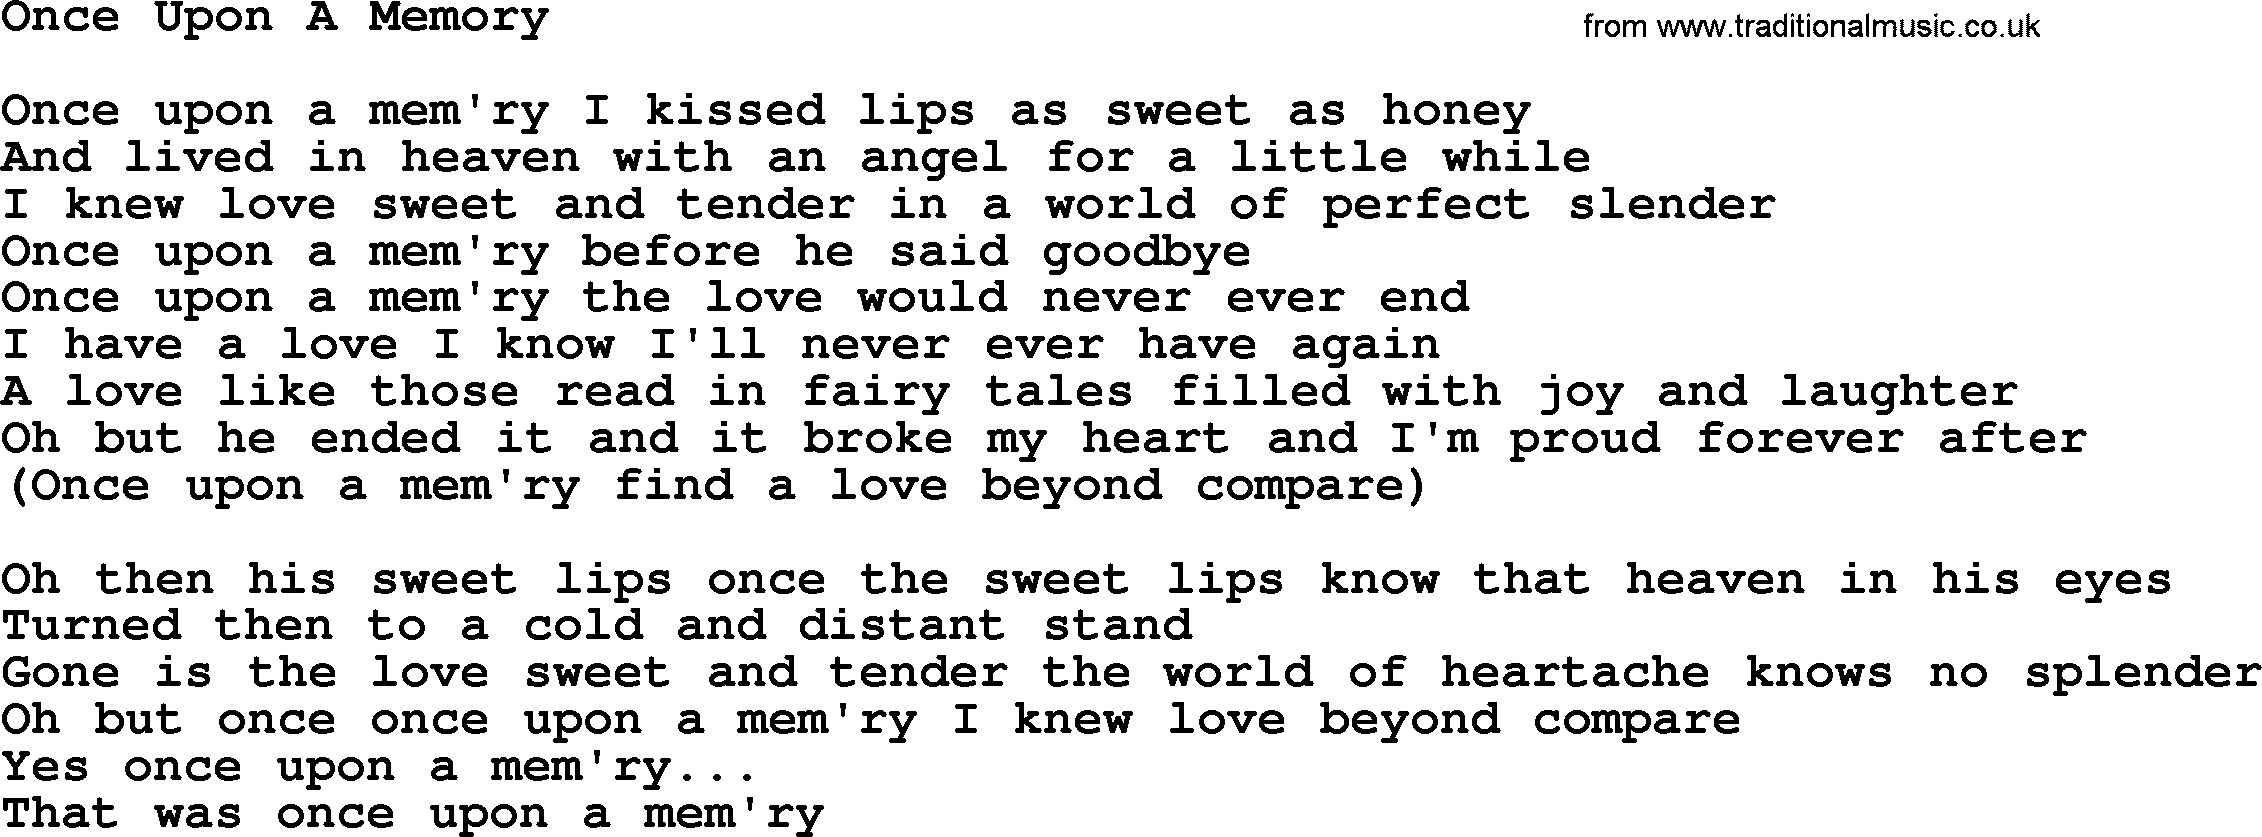 Dolly Parton song Once Upon A Memory.txt lyrics